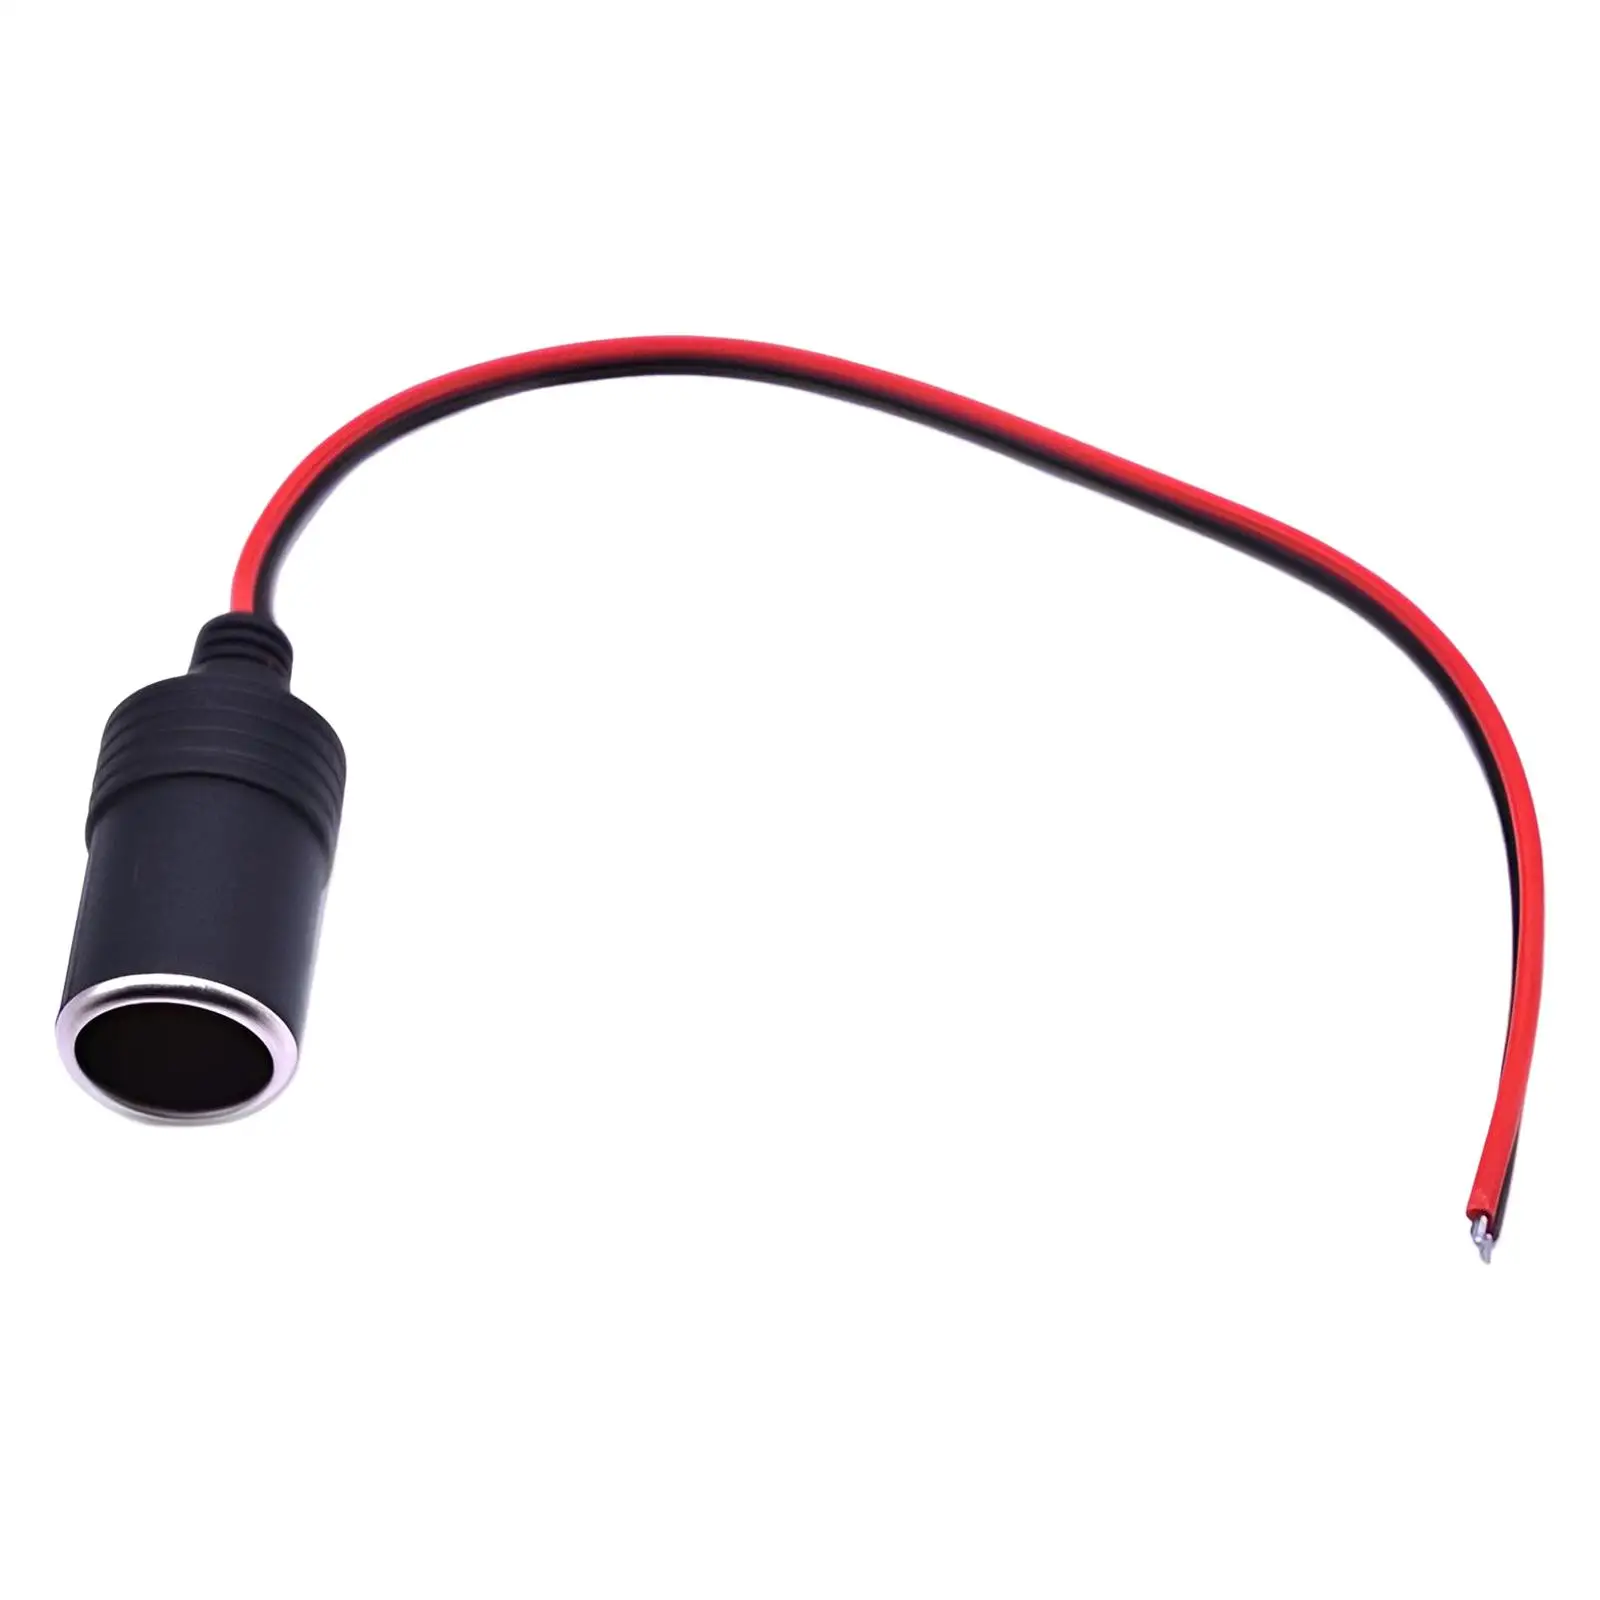 Universal Car Power Cigarette Lighter Female Adapter Cable Plug/ Replace 12V 24V 120W High Current 10A Max/